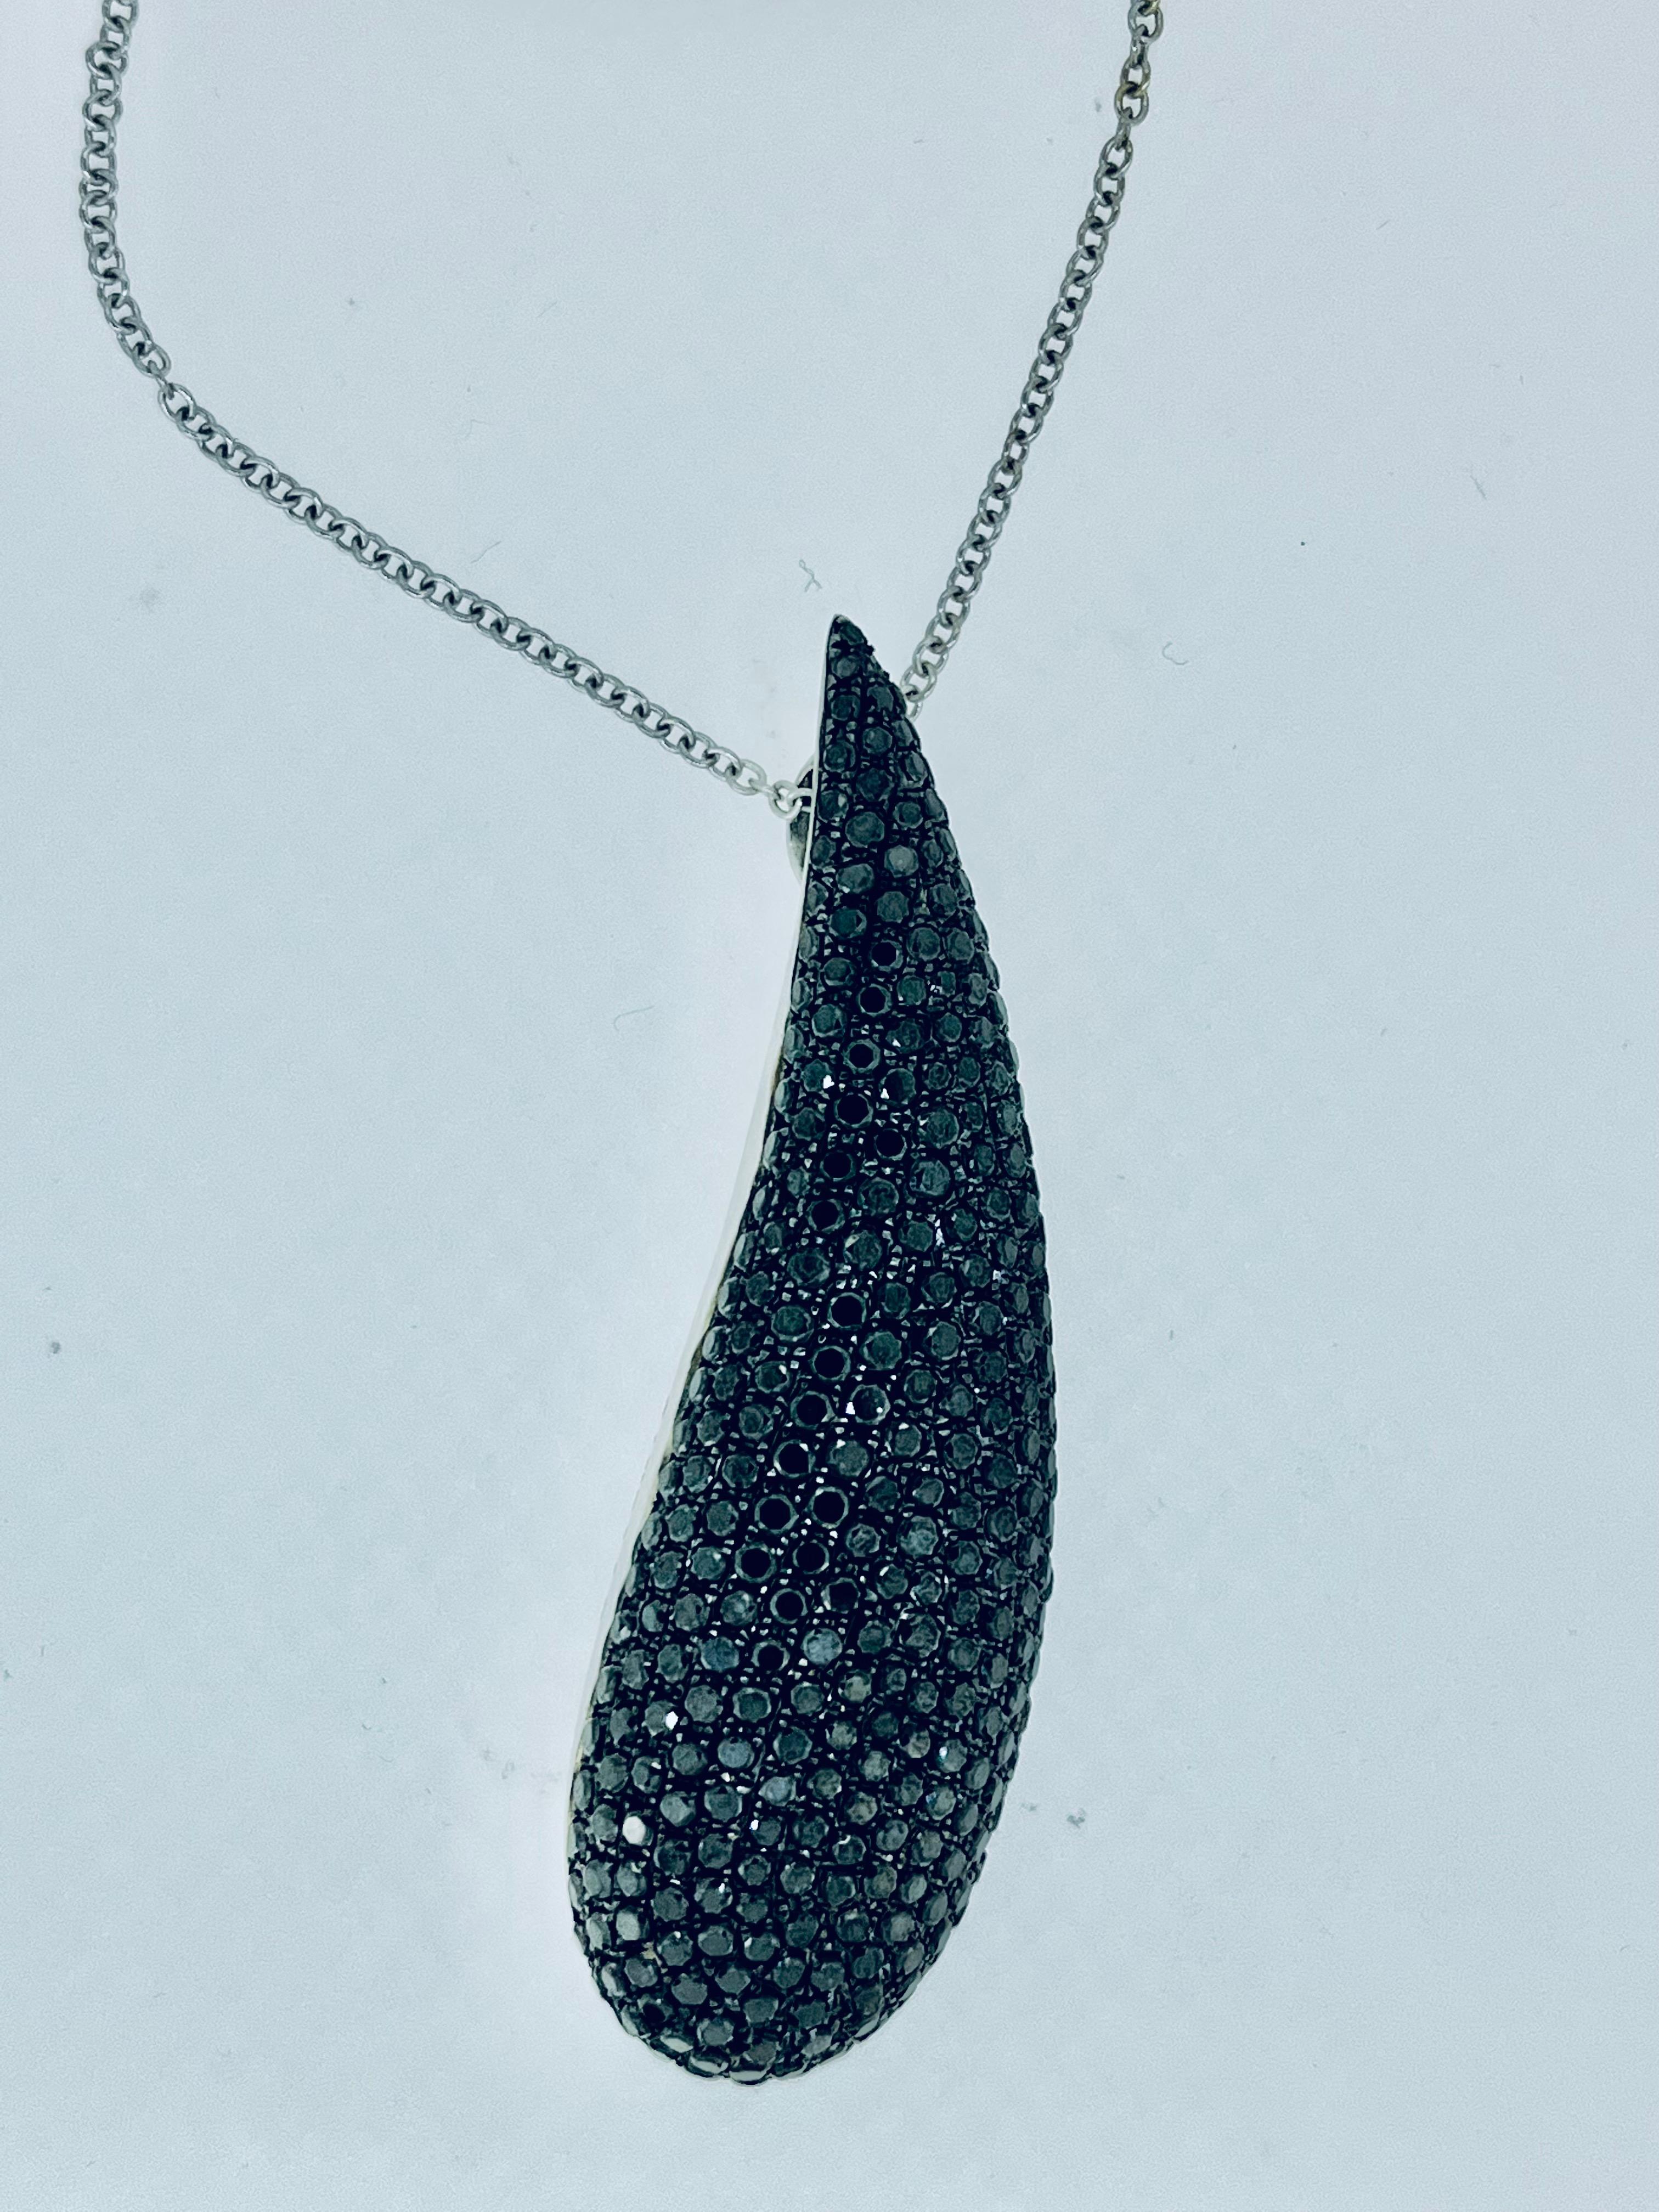 3ct Black Diamonds Tear Drop Shape Pendant with 18ct White Gold Trace Chain In Excellent Condition For Sale In London, GB